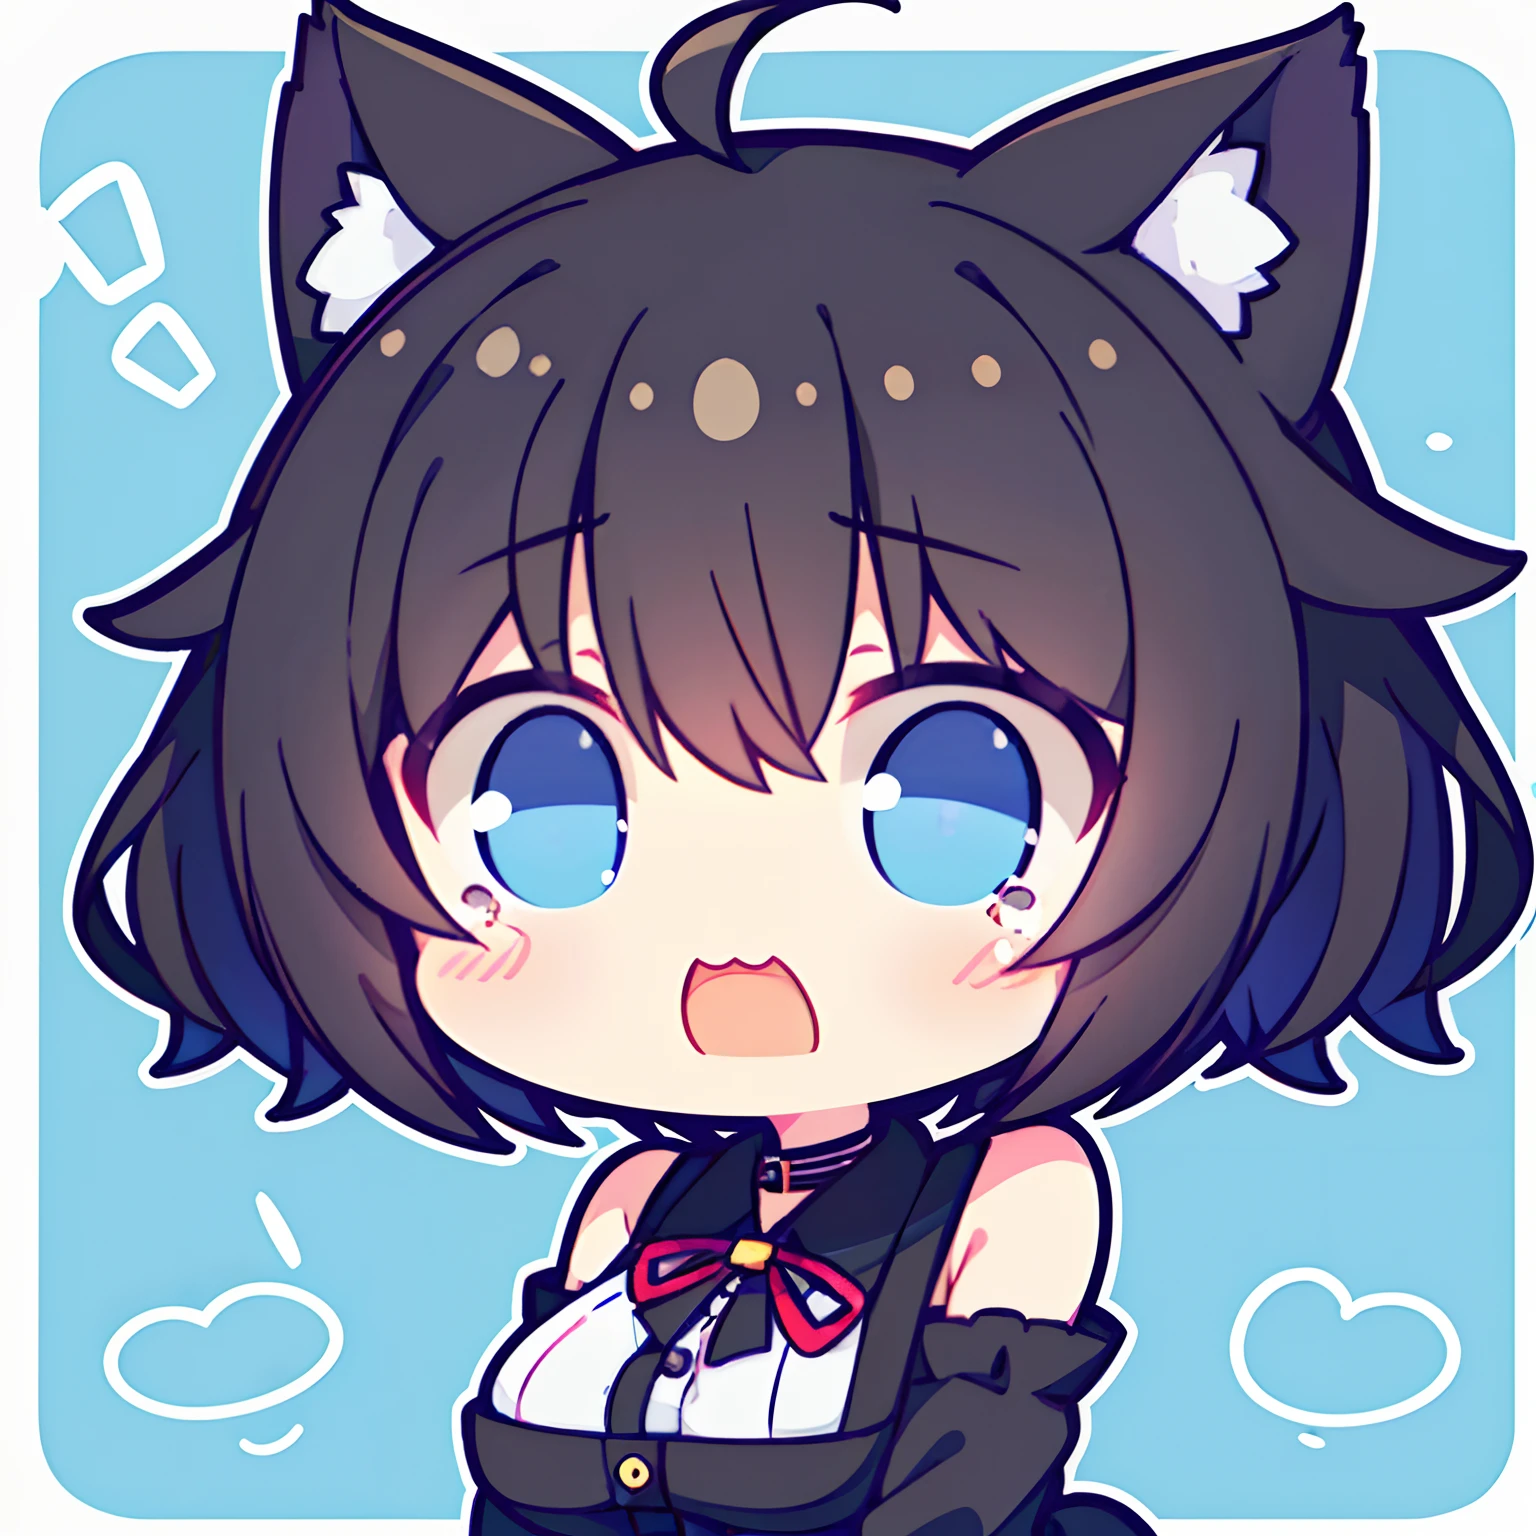 girl with、Chibi、((Best Quality, high_resolution, Distinct_image)),(Black hair), (Black cat ears), (Ahoge), (absurdly short hair), (Wavy Hair), (Blue eyes),、Crying face、mideum breasts、